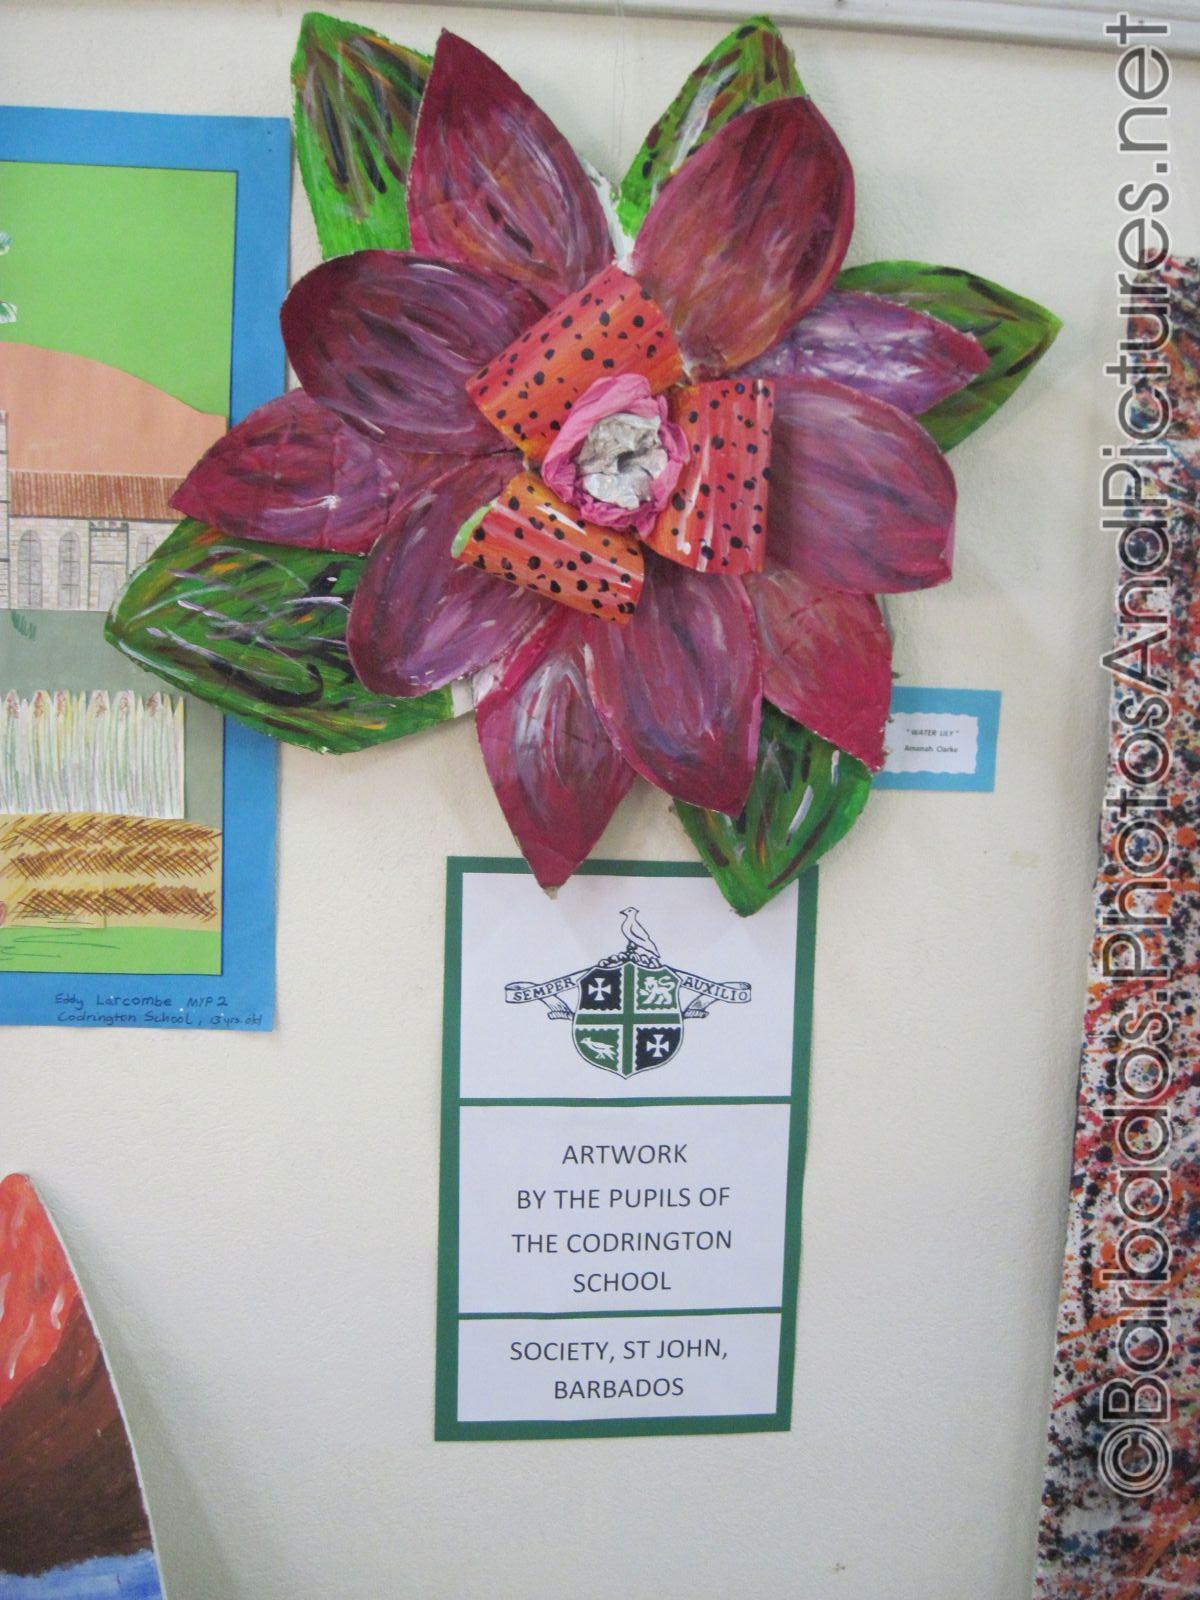 Artwork by the pupils of the codrington School at Orchid World in Barbados.jpg
